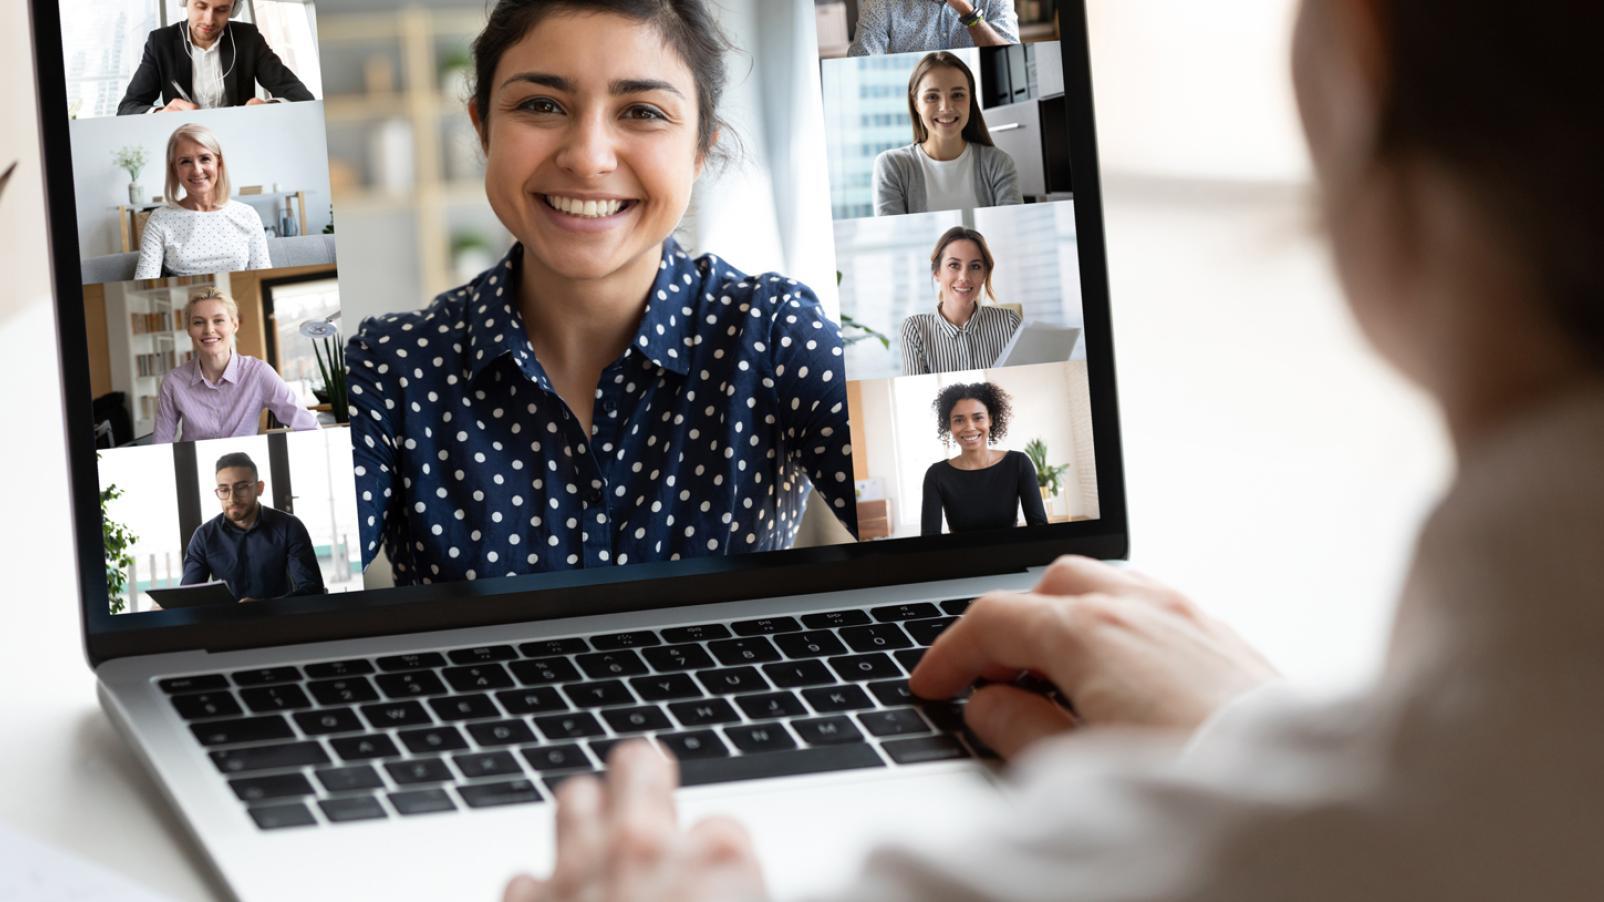 A person sitting at their laptop on a video call with several people